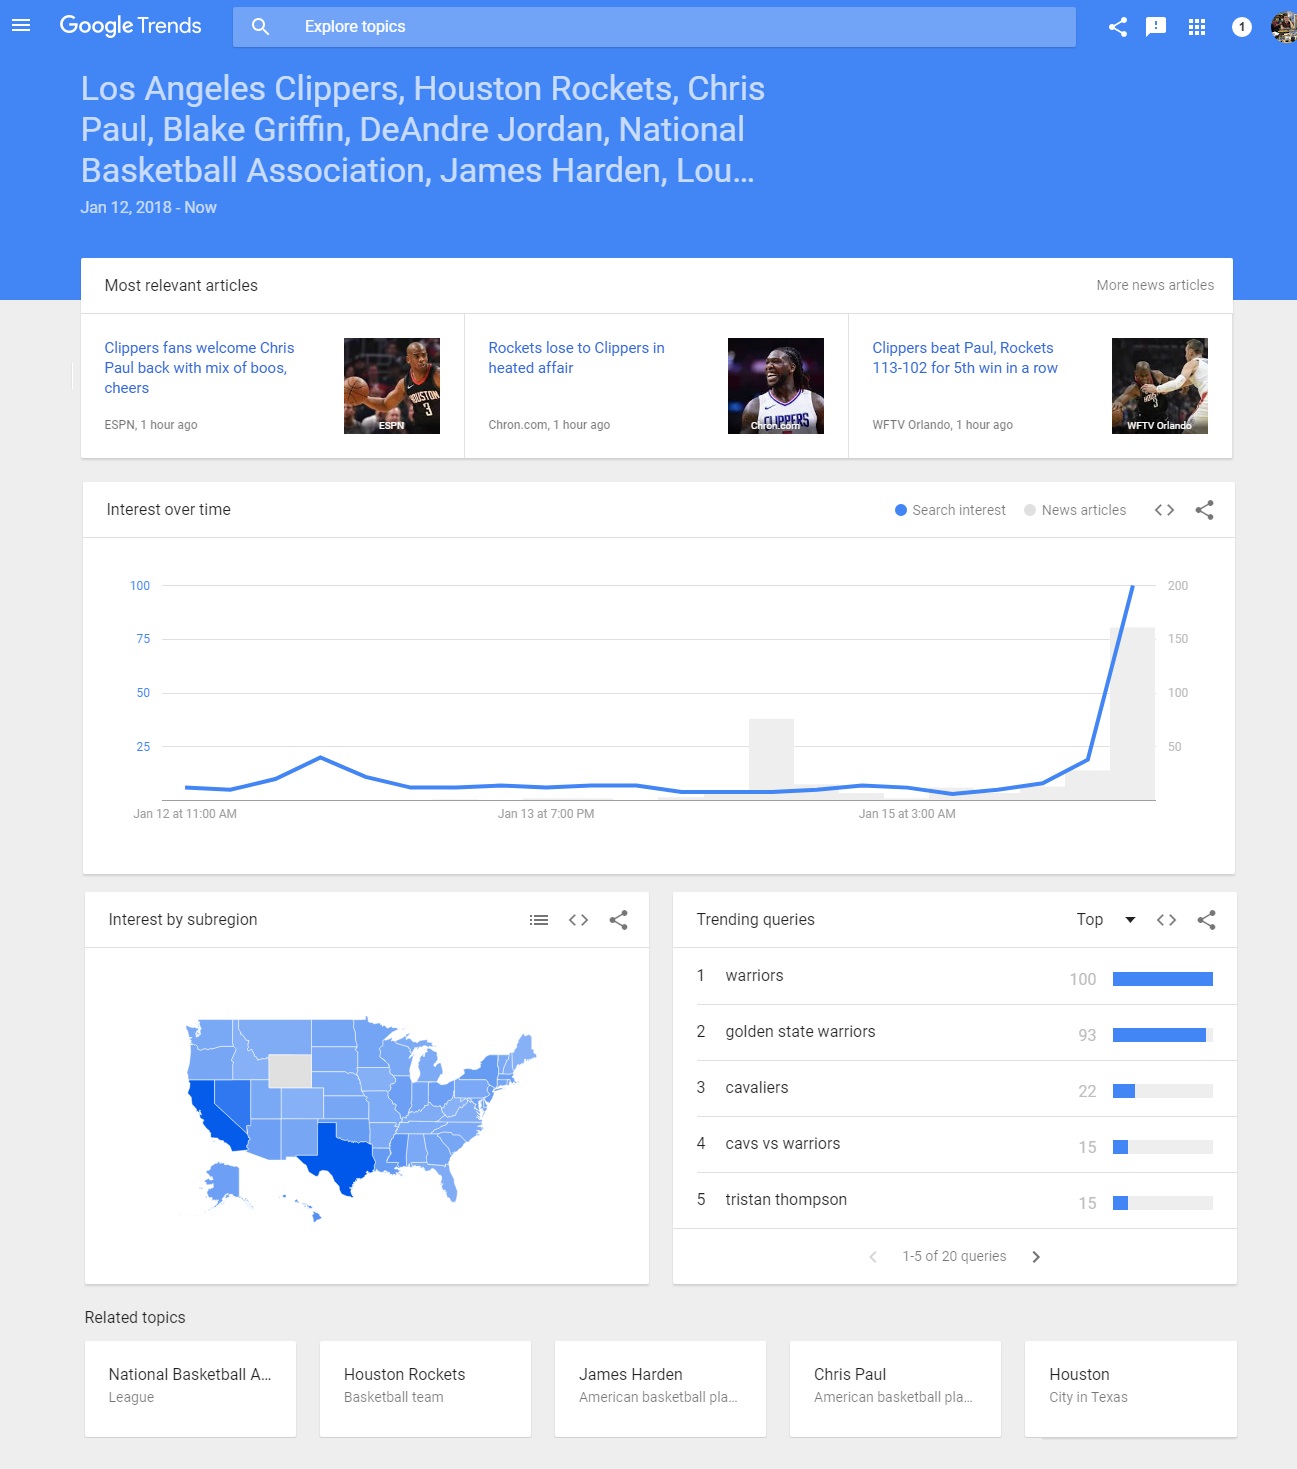 Expanded Hot Topics on Google Trends